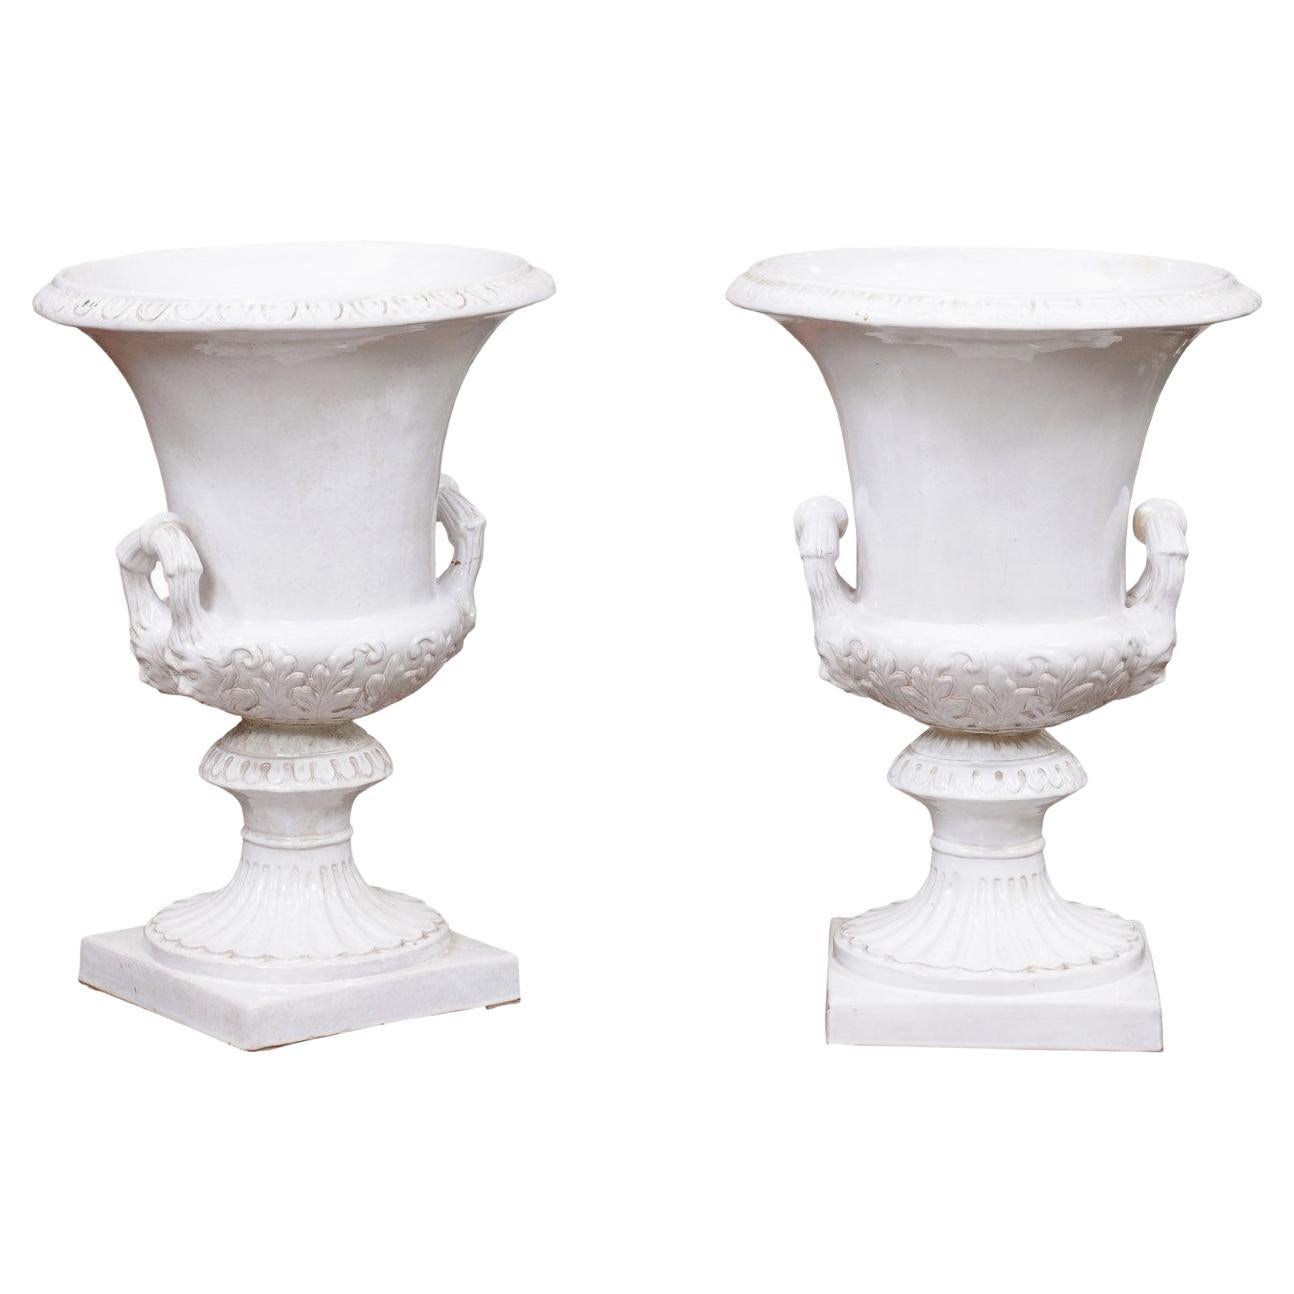 Pair of Large Italian White Glazed Urns, Neoclassical Style ca. 1890 For Sale